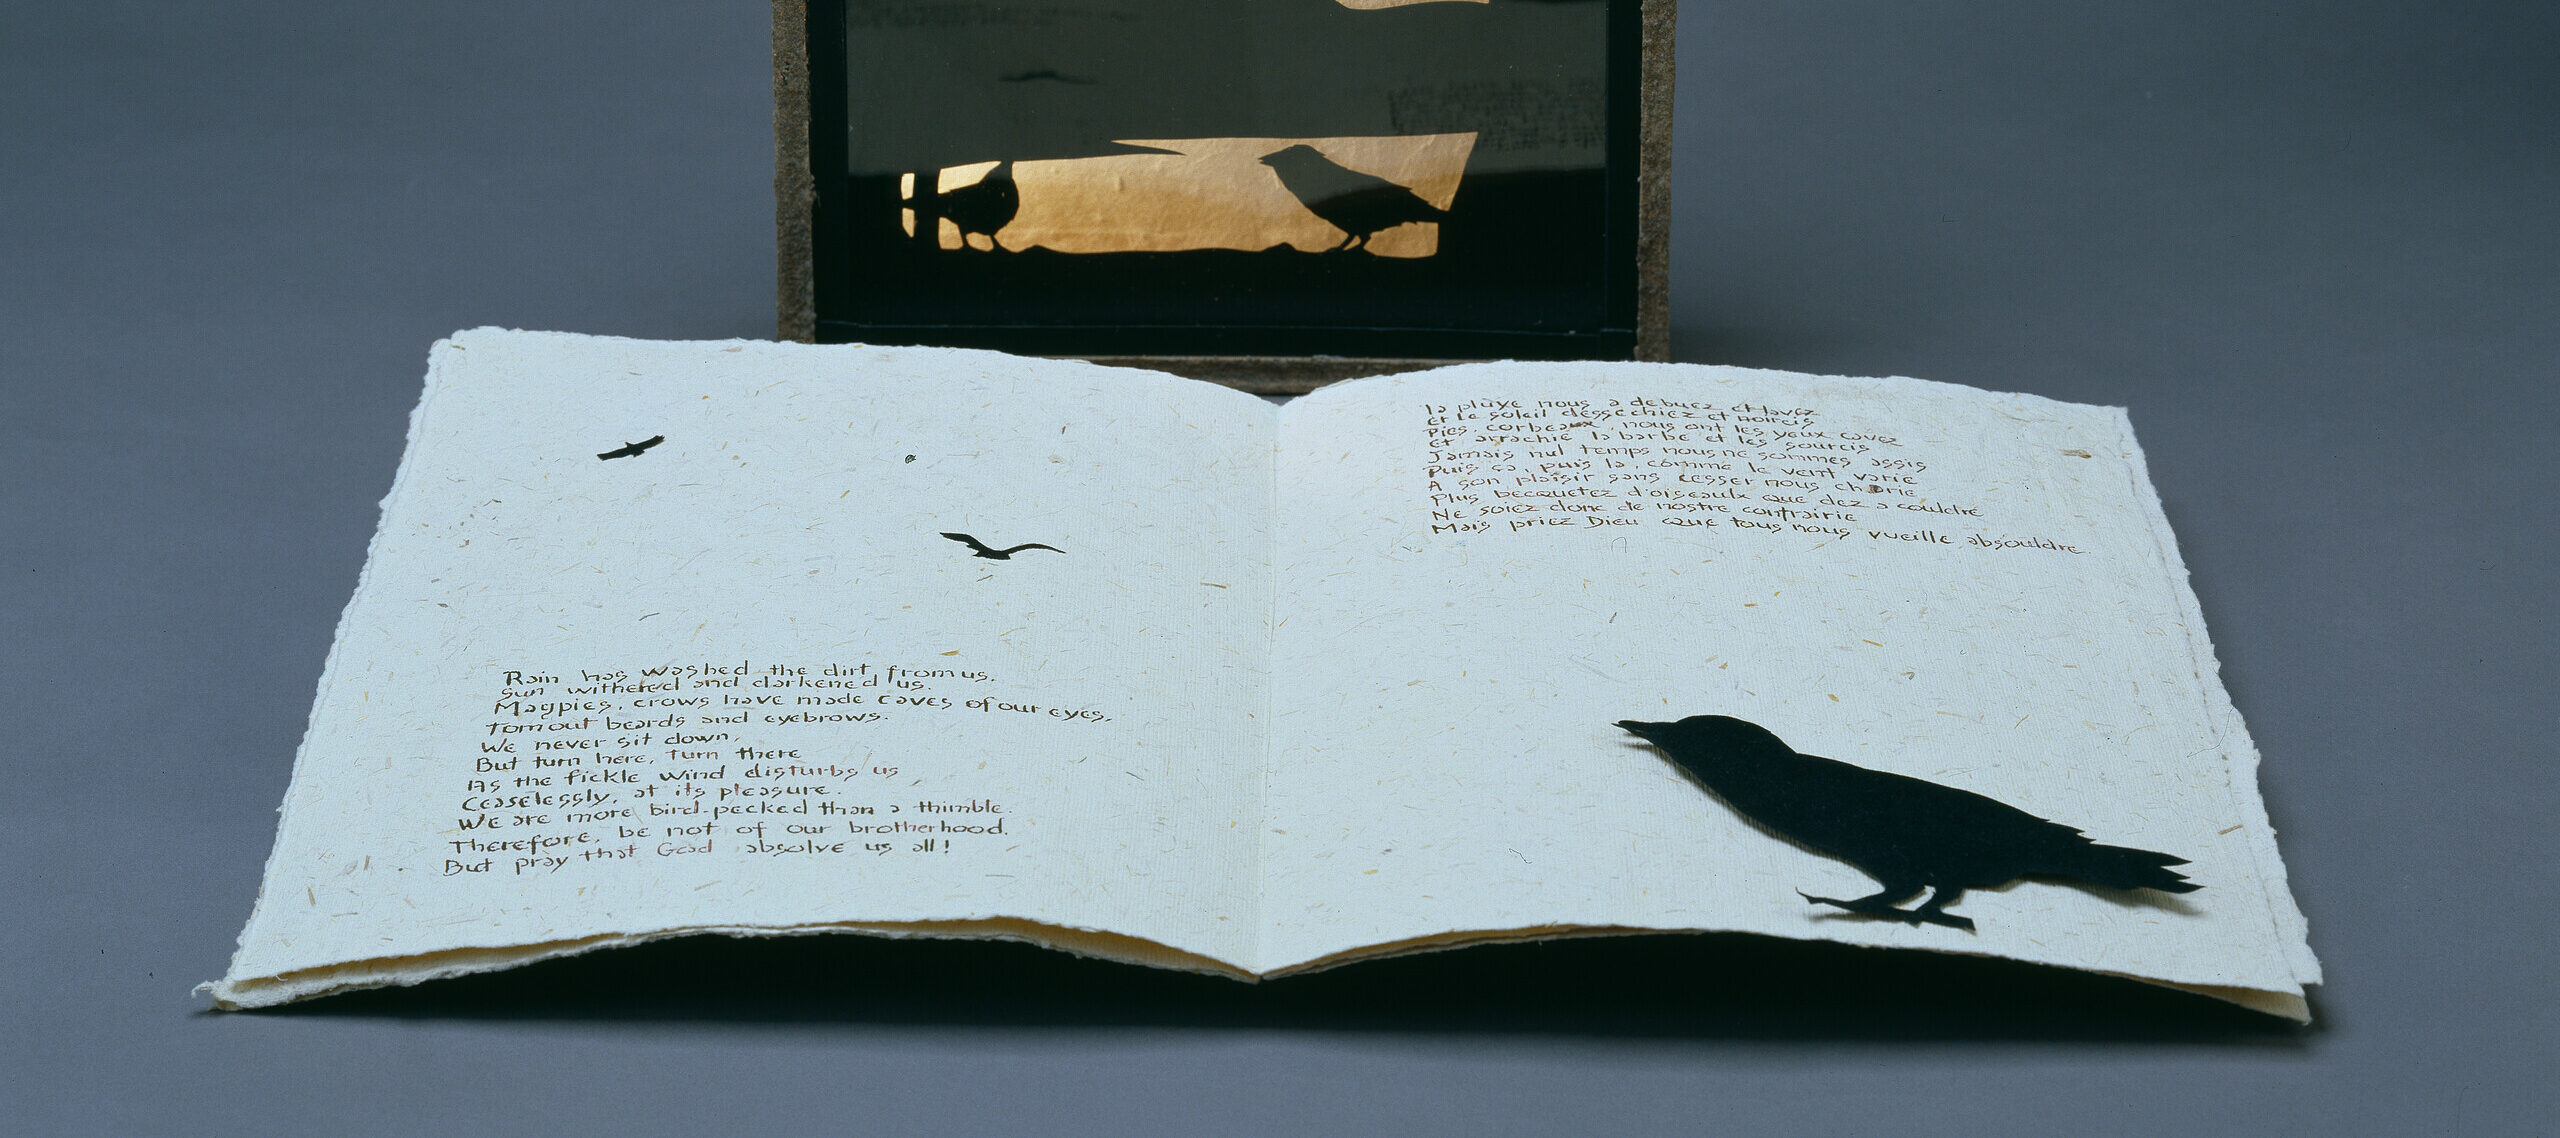 A book is opened to a page with black outlines of crows and a paragraph is written on each page in neat printed handwriting. Standing behind the book, a stone frame outlines the shadow of three people hanging from ropes with crows surrounding their bodies.